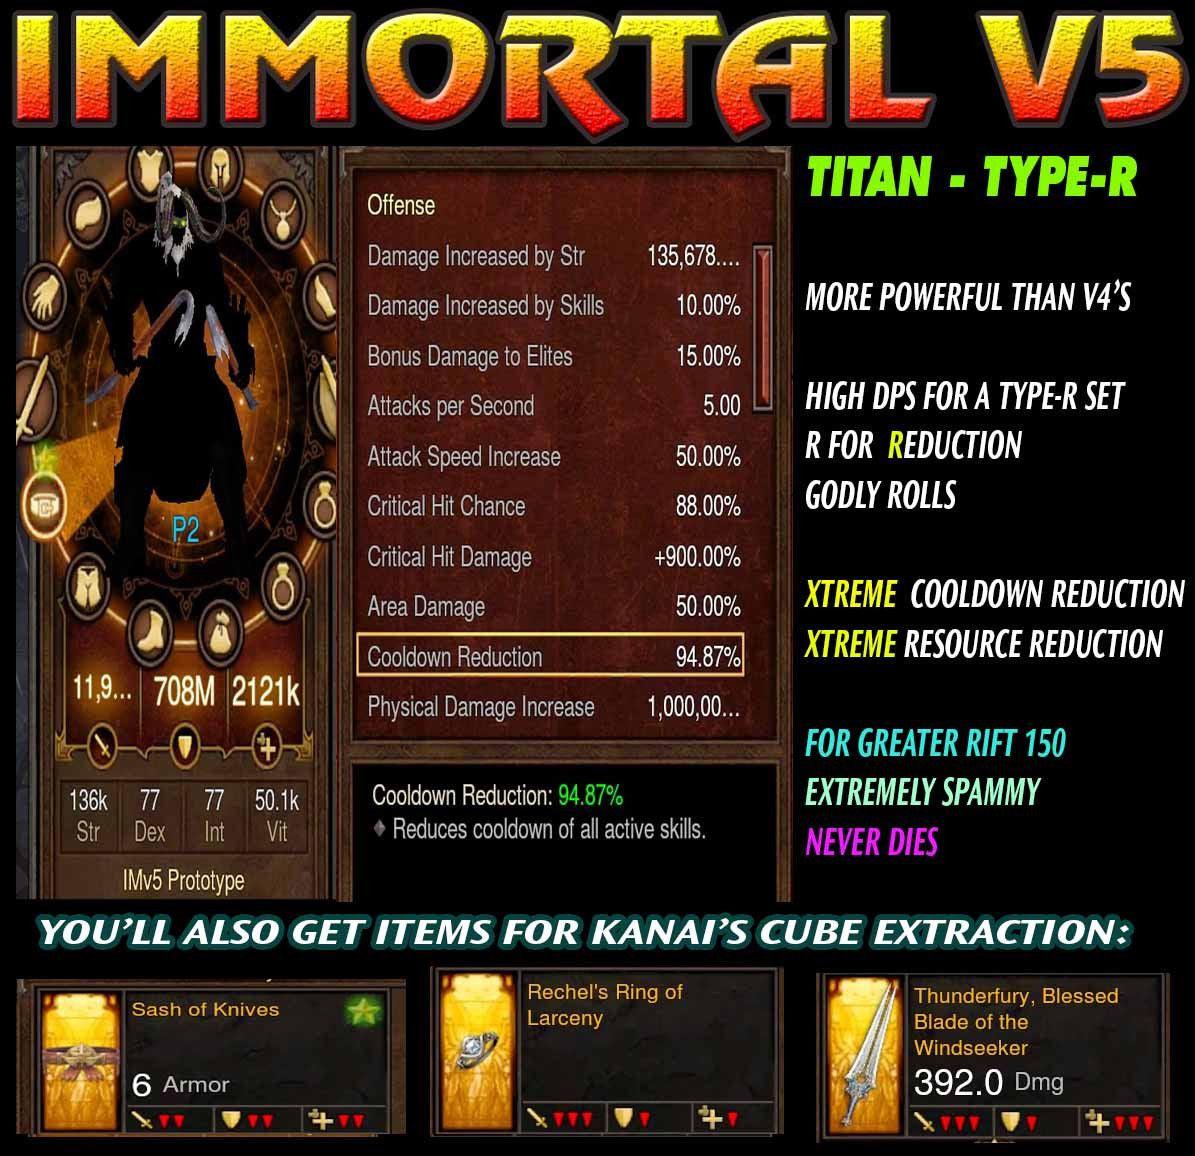 [Created 1/26/17] Diablo 3 Immortal v5 Titan Type-R FOH Speed WW Waste Barbarian Modded Set for Rift 150 Wind Diablo 3 Mods ROS Seasonal and Non Seasonal Save Mod - Modded Items and Gear - Hacks - Cheats - Trainers for Playstation 4 - Playstation 5 - Nintendo Switch - Xbox One